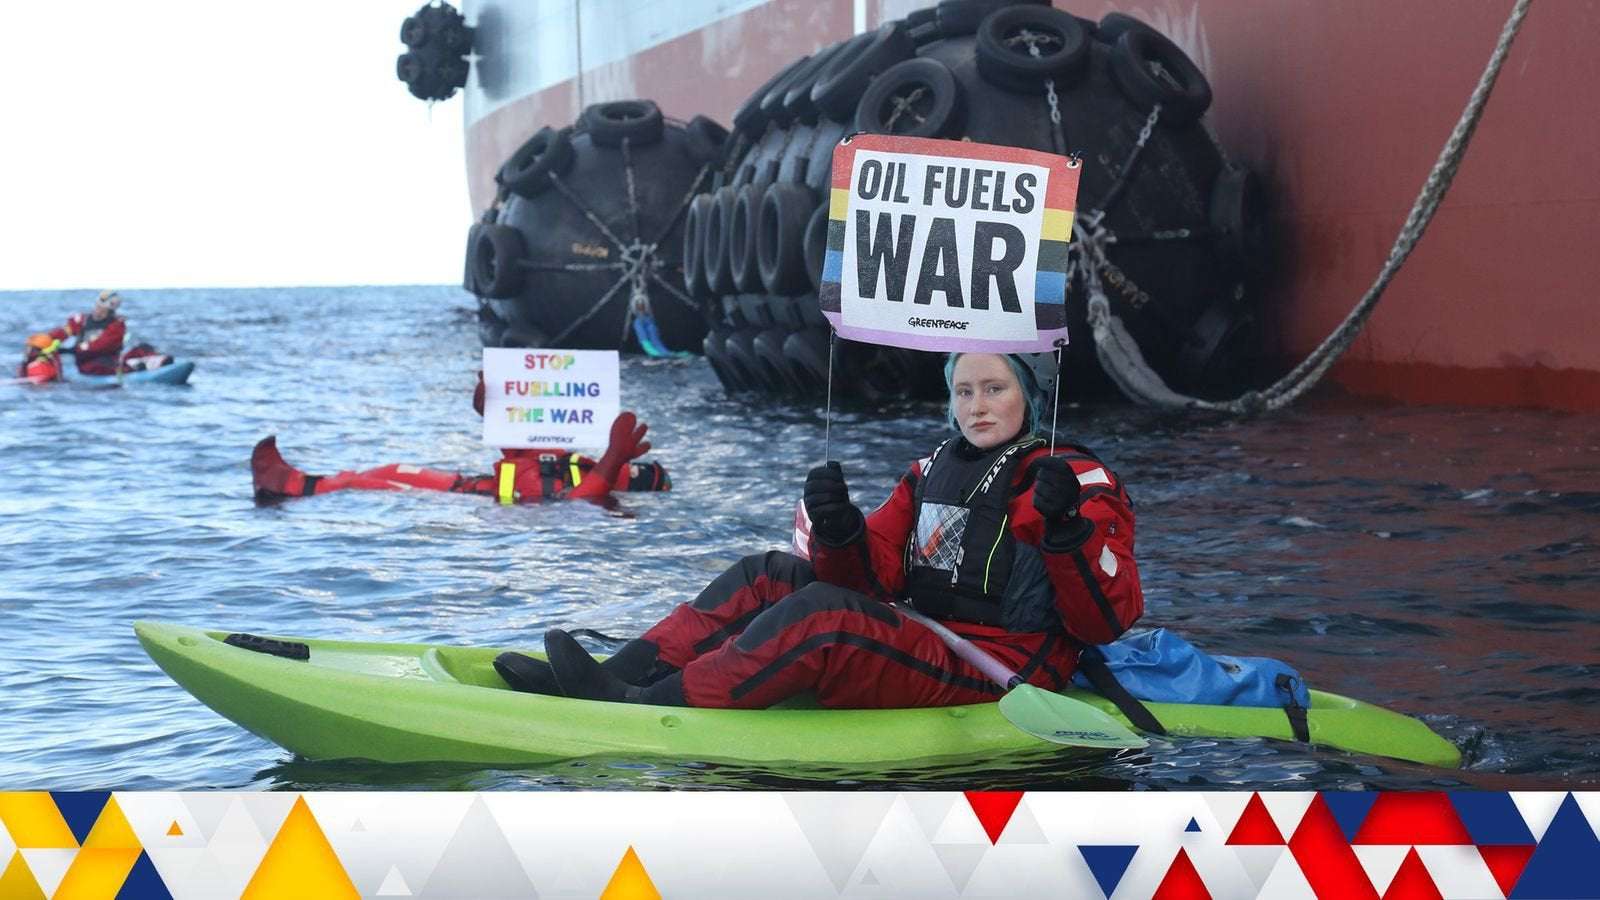 image for Ukraine war: Huge tankers transferring Russian oil blocked by activists in kayaks